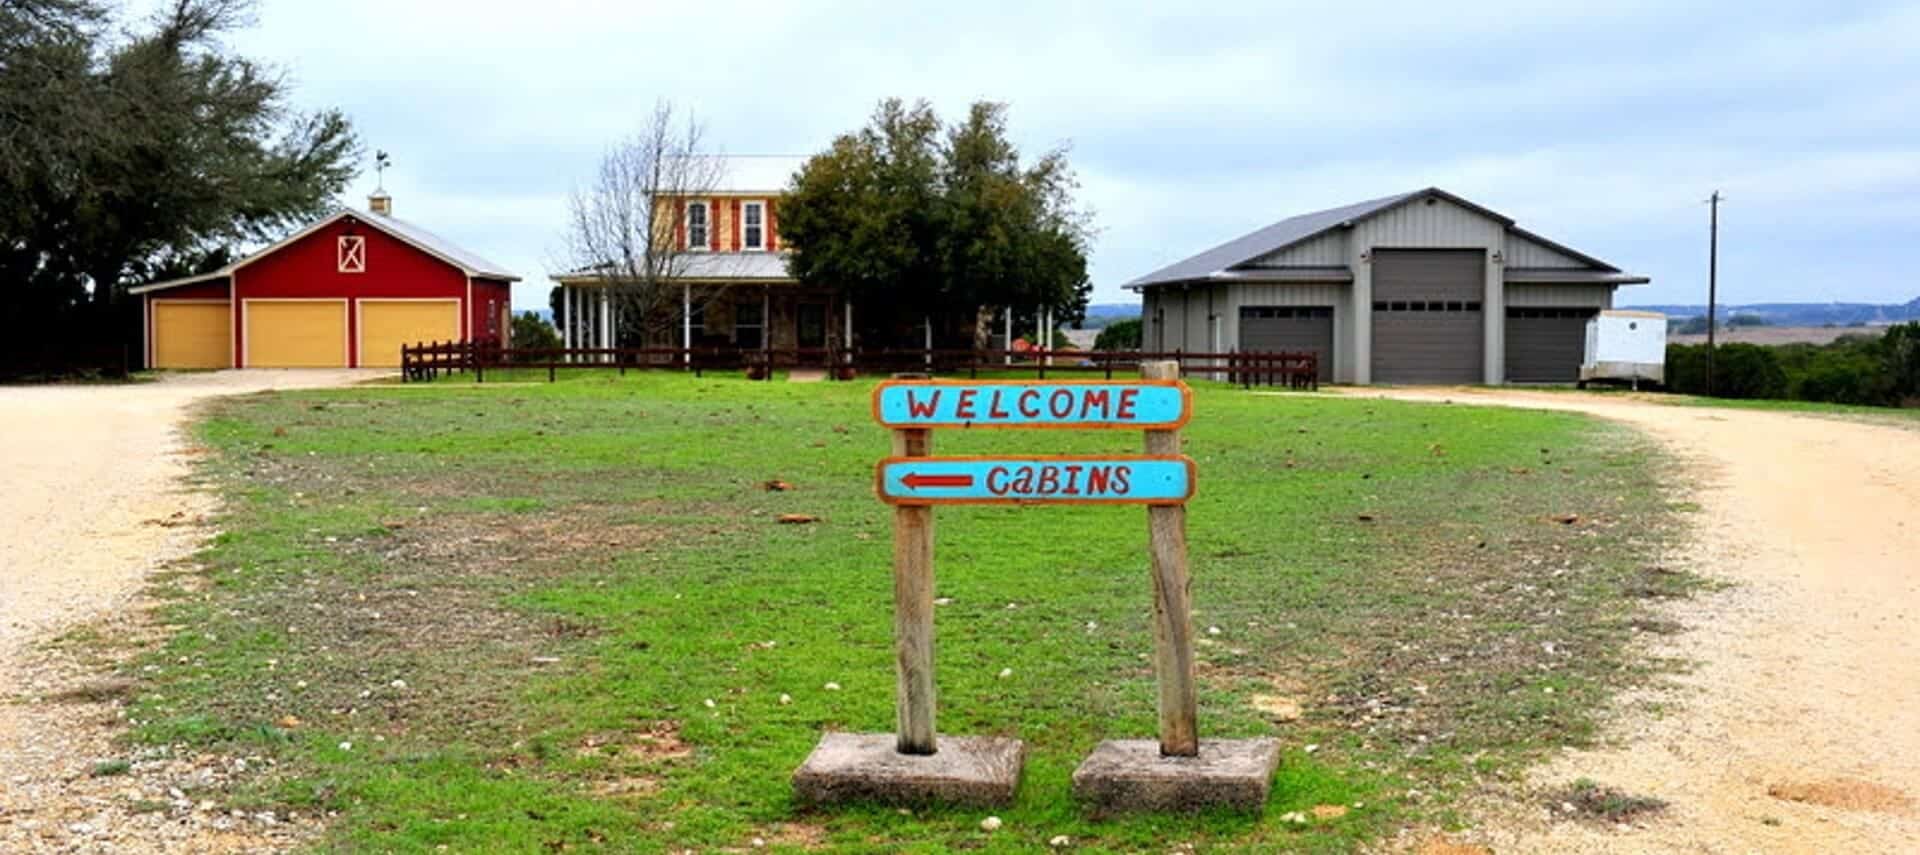 Sign at the end of a driveway of a home saying "Welcome" and an arrow pointing the way to cabins